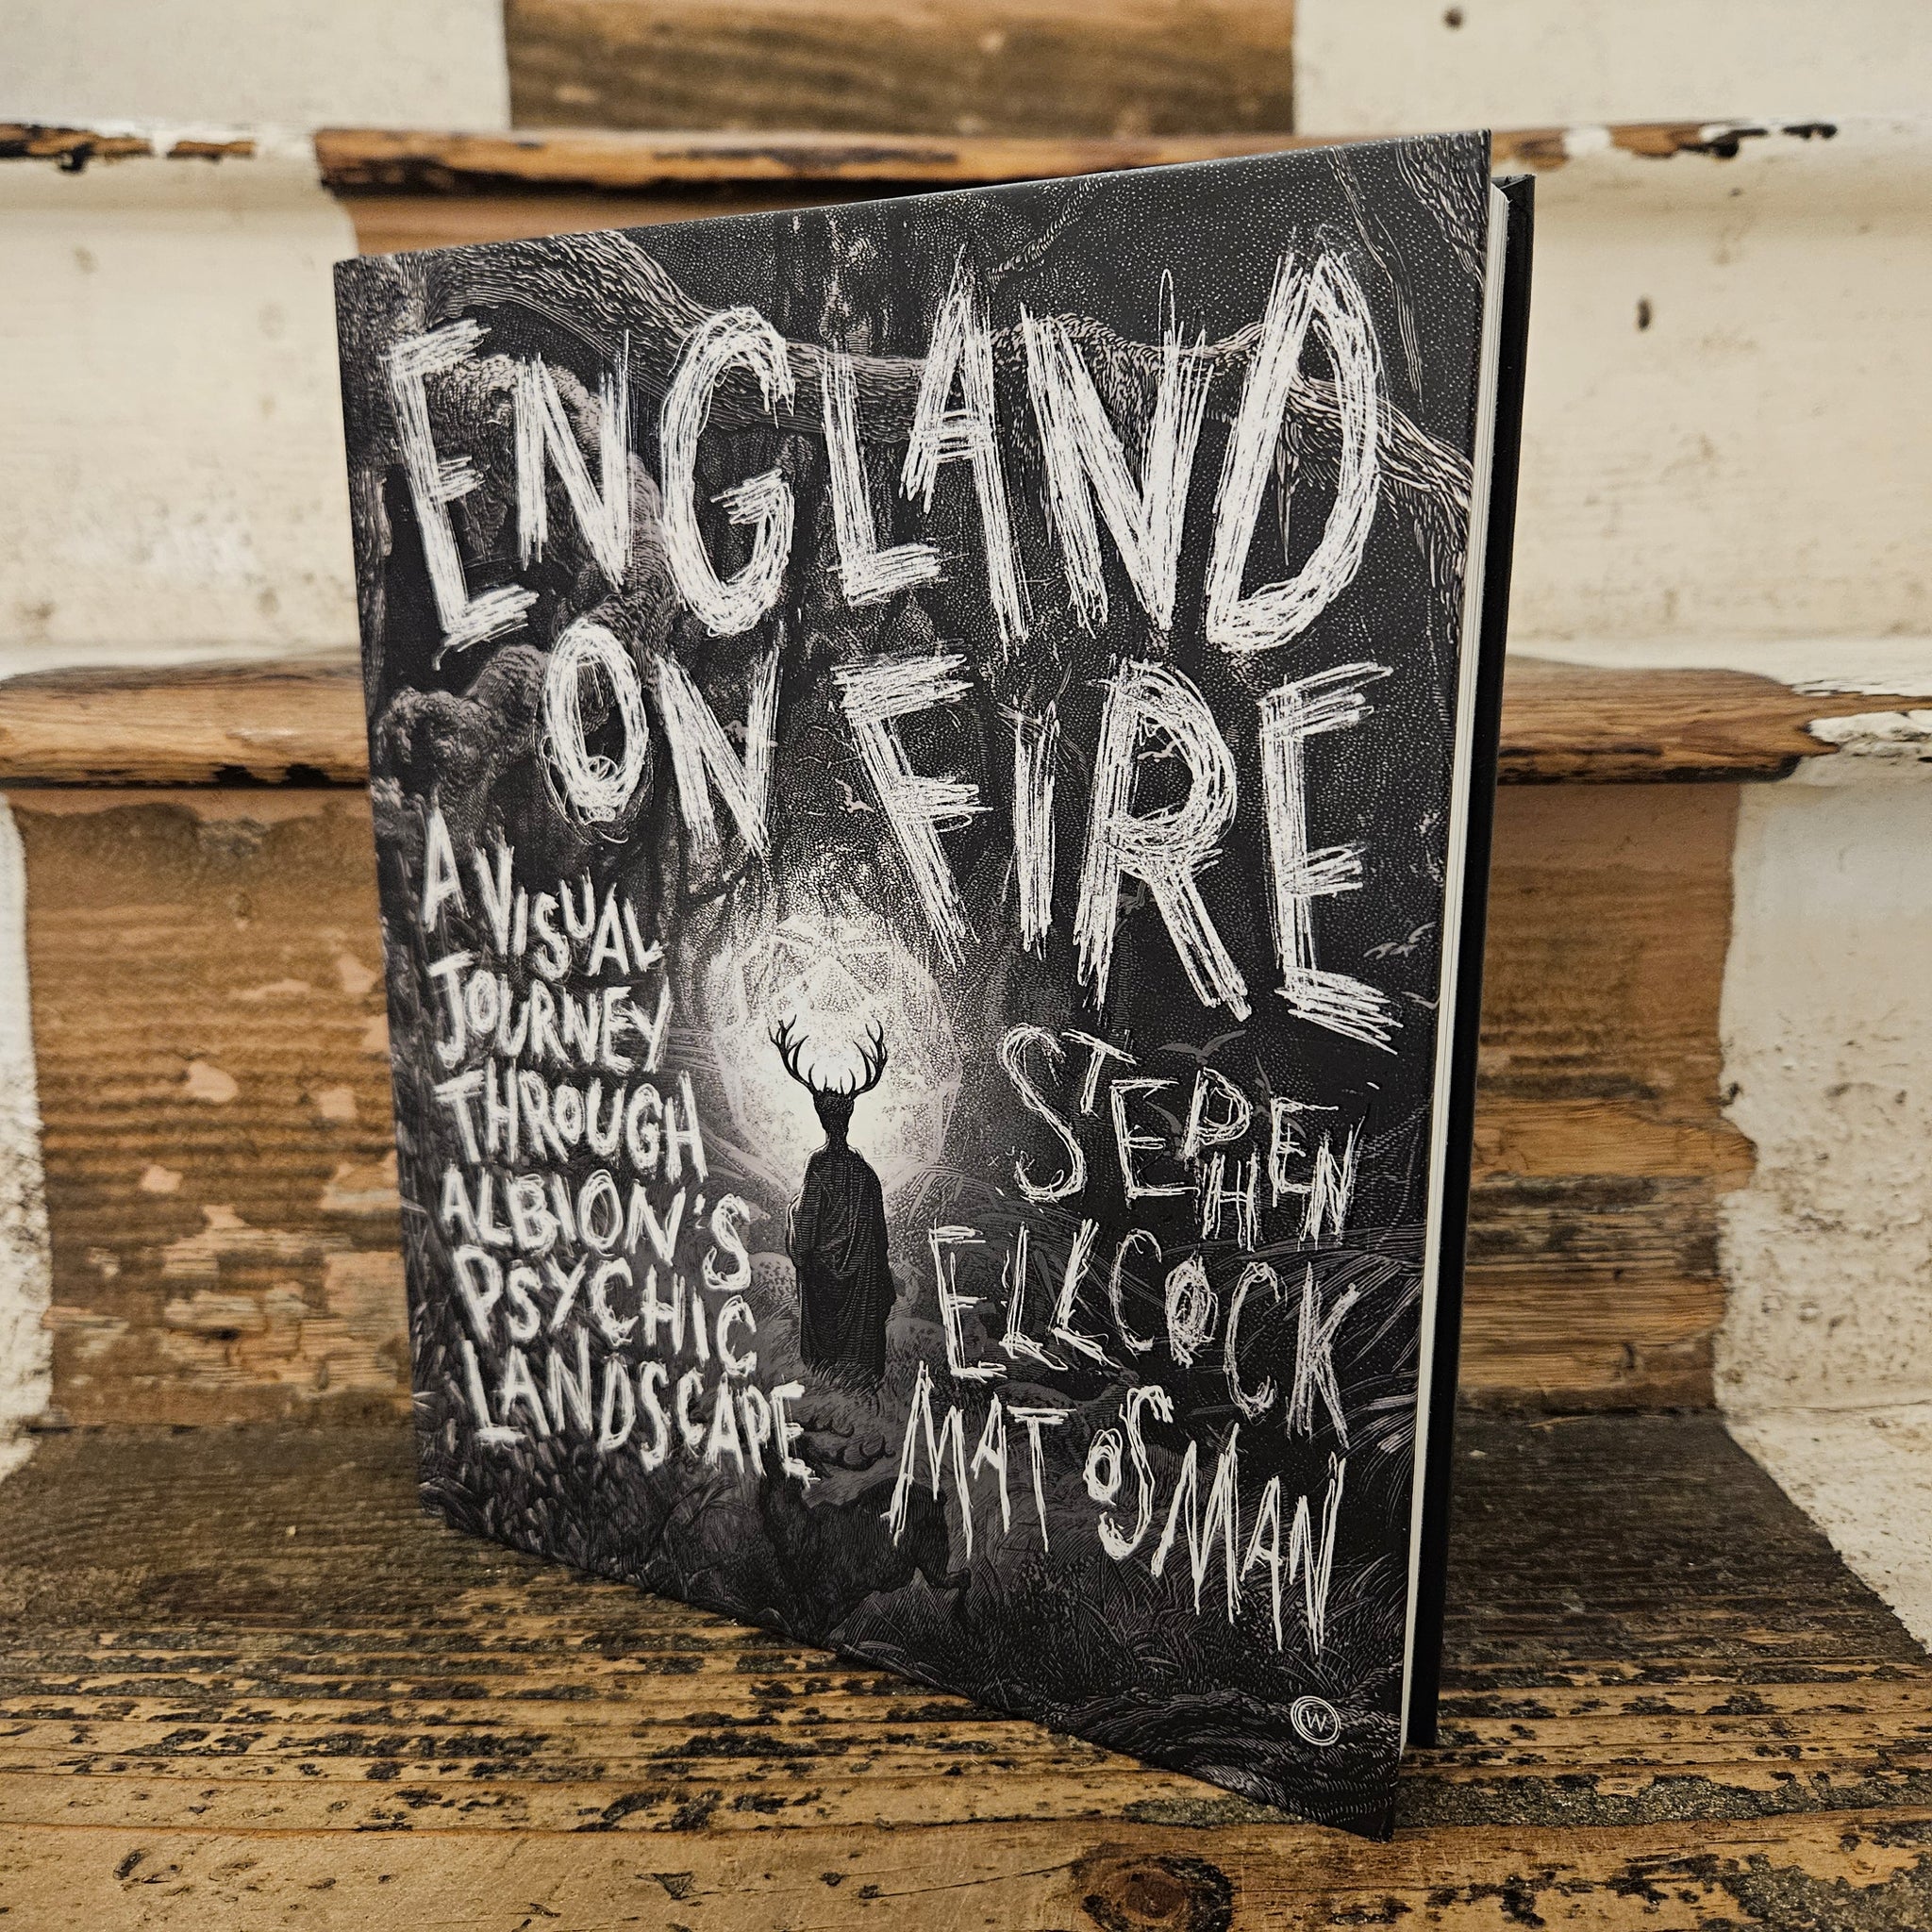 Front cover of England on Fire by Stephen Ellcock and Mat Osman